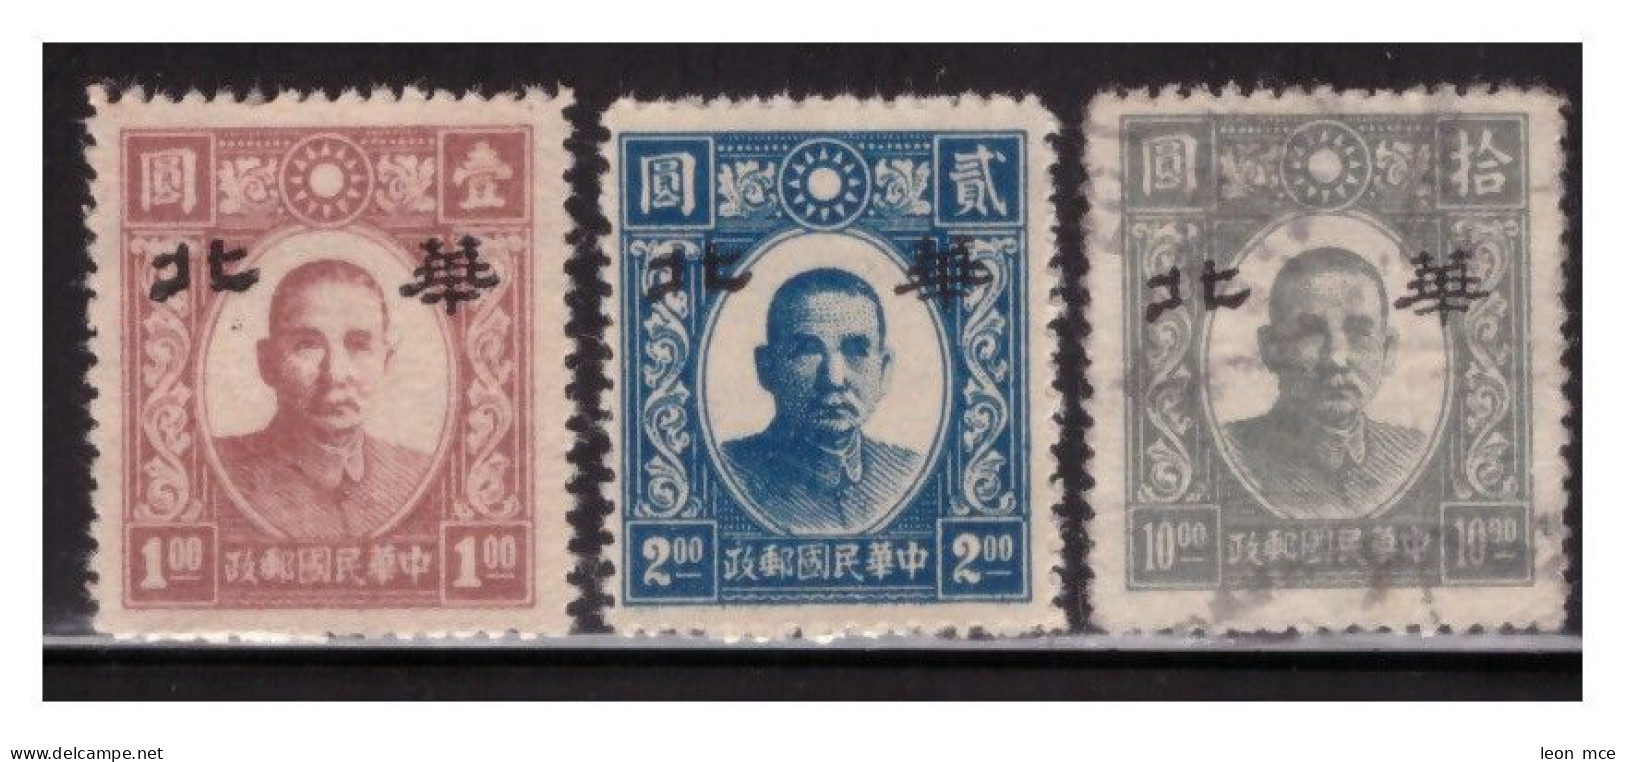 1945 CHINA NORTH "HWA PEI" Dr. SUN YAT-SEN, WITHOUT Overprint Are Proofs STAMPS (3) - 1941-45 Chine Du Nord